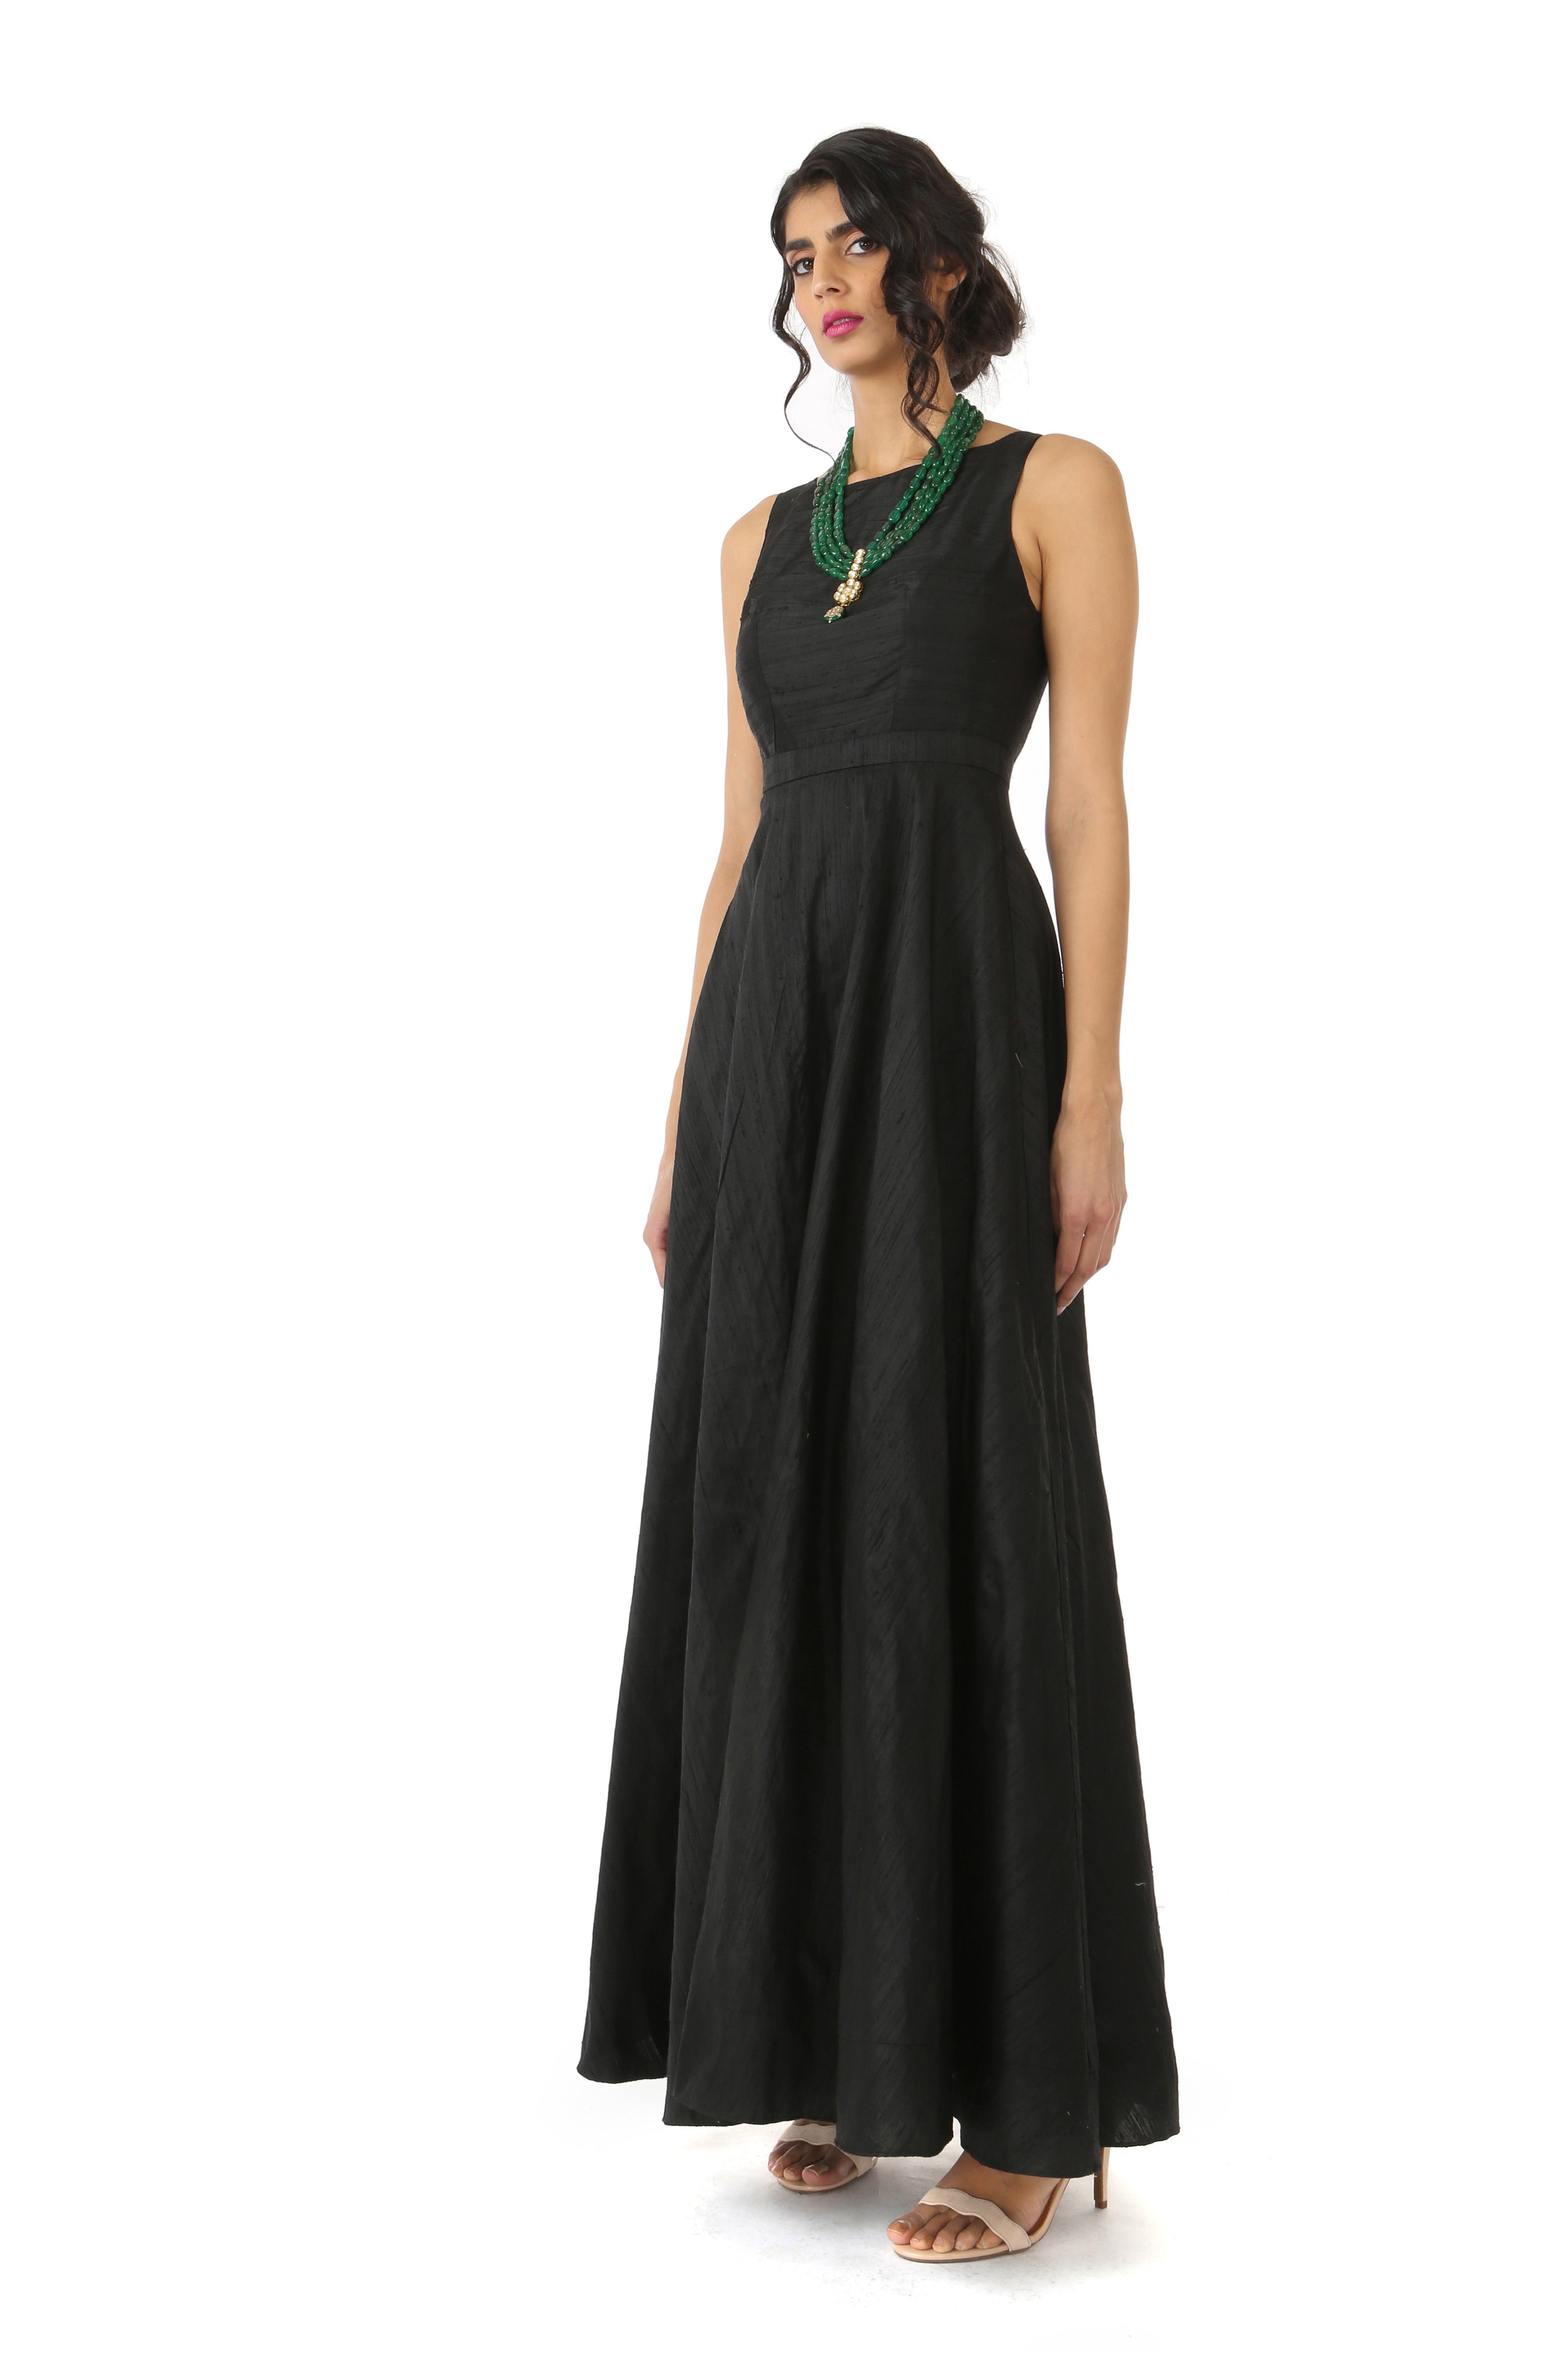 THE LIBAS COLLECTION BLACK INDIAN STYLE GOWN FOR WOMEN - The Libas  Collection - Ethnic Wear For Women | Pakistani Wear For Women | Clothing at  Affordable Prices